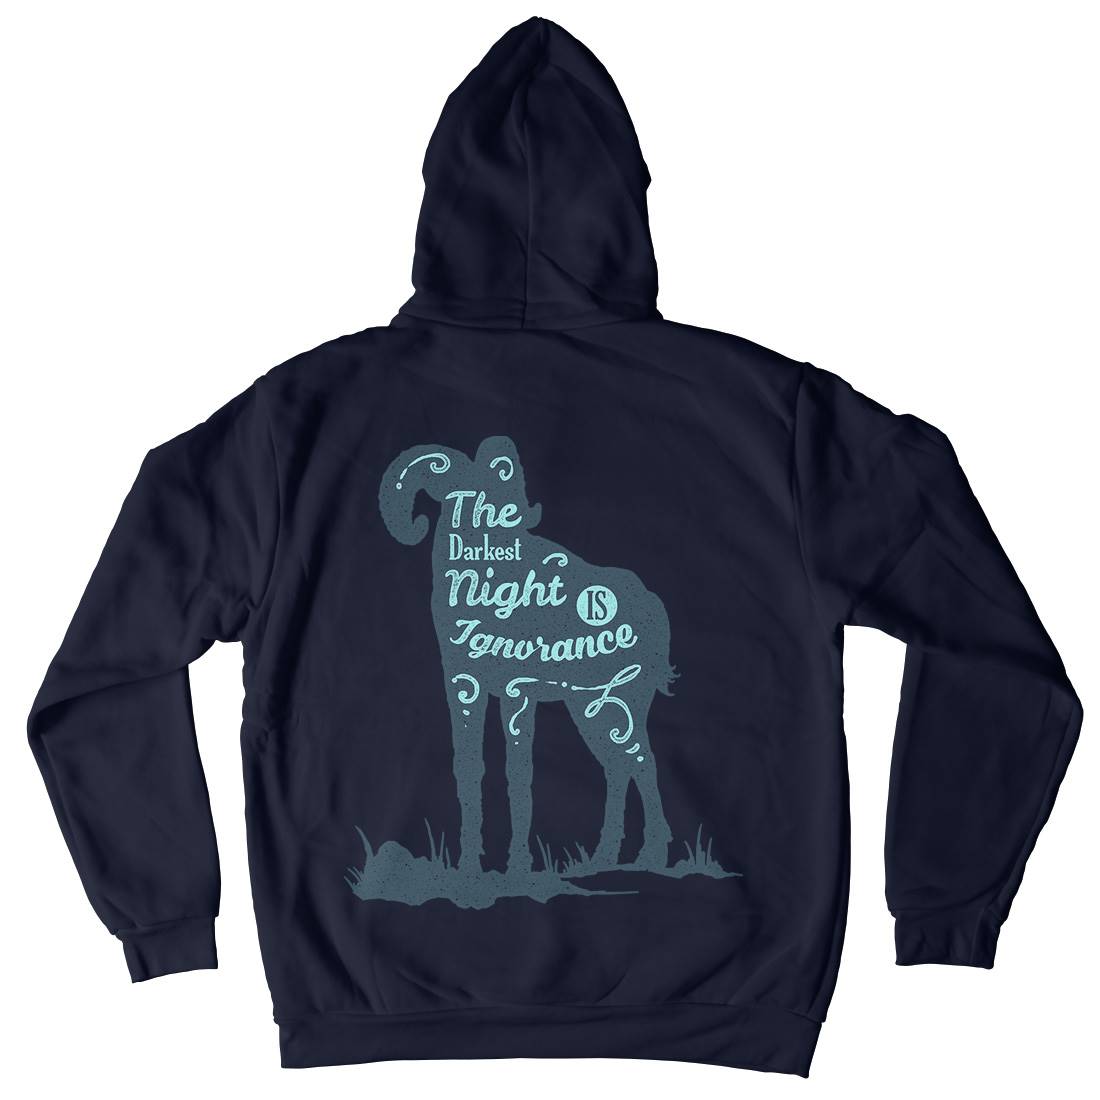 Darkest Night Mens Hoodie With Pocket Quotes A377